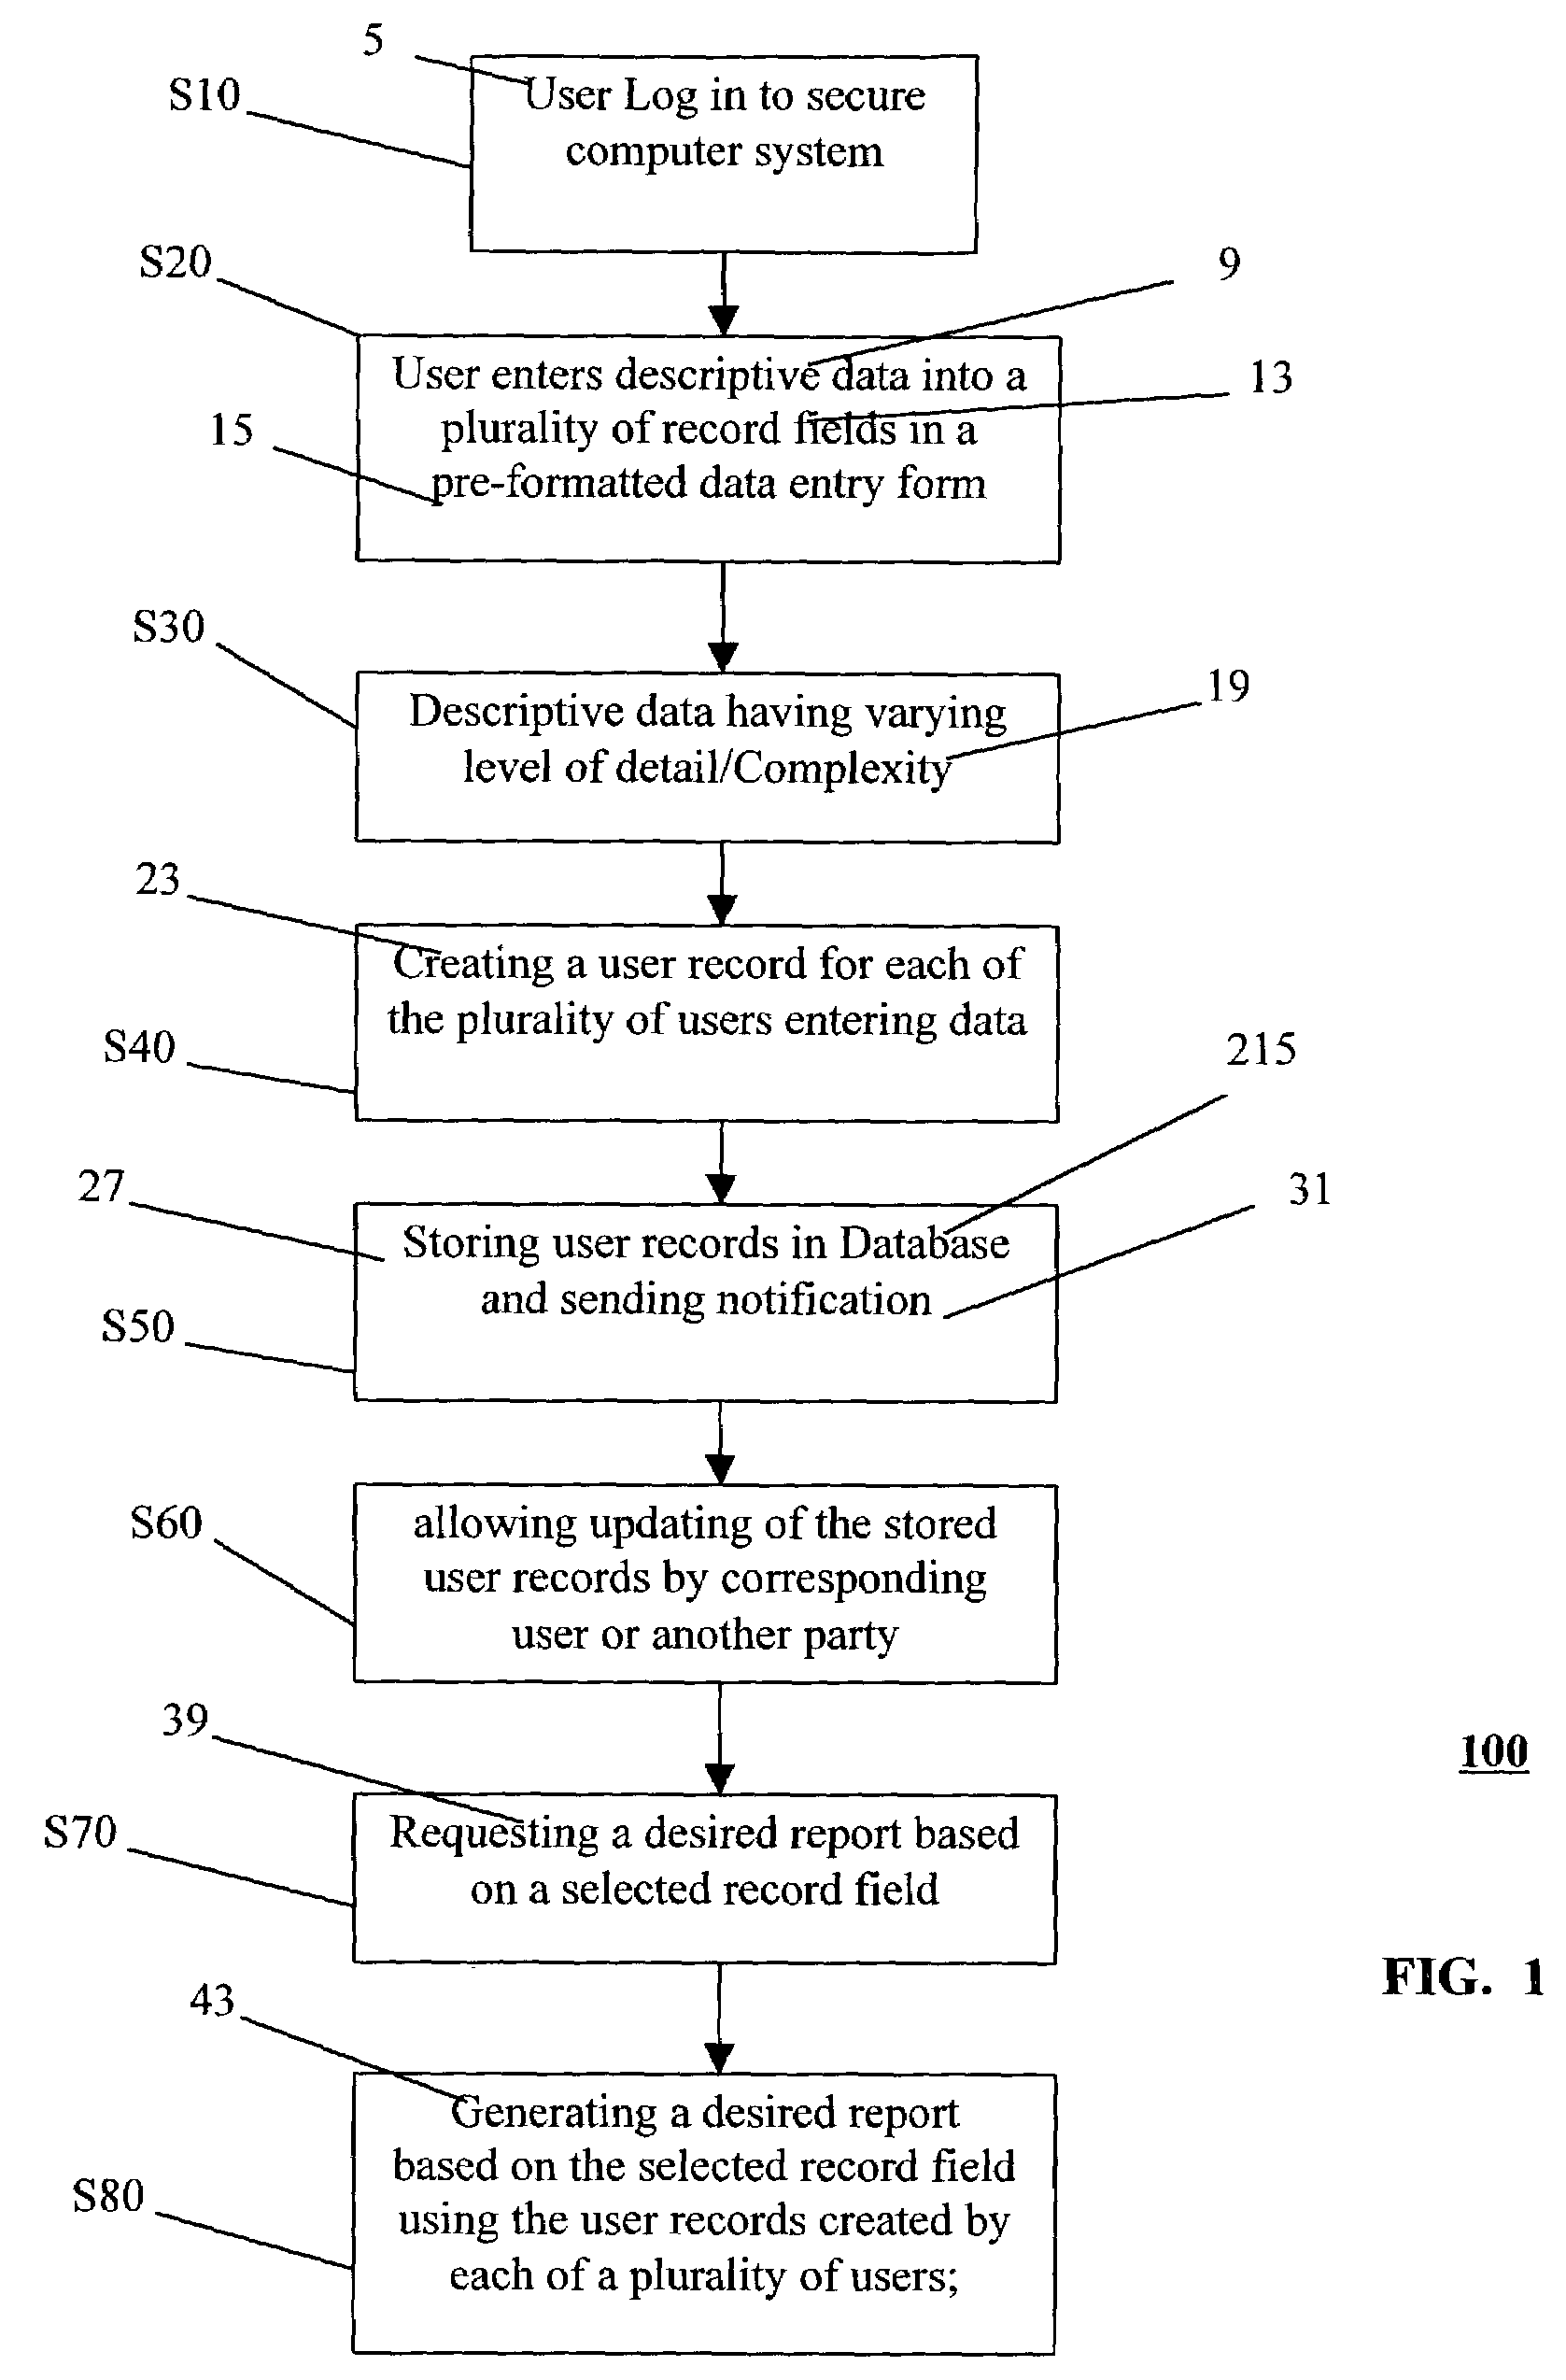 Method and system for automated generation of a requested report in a computer system